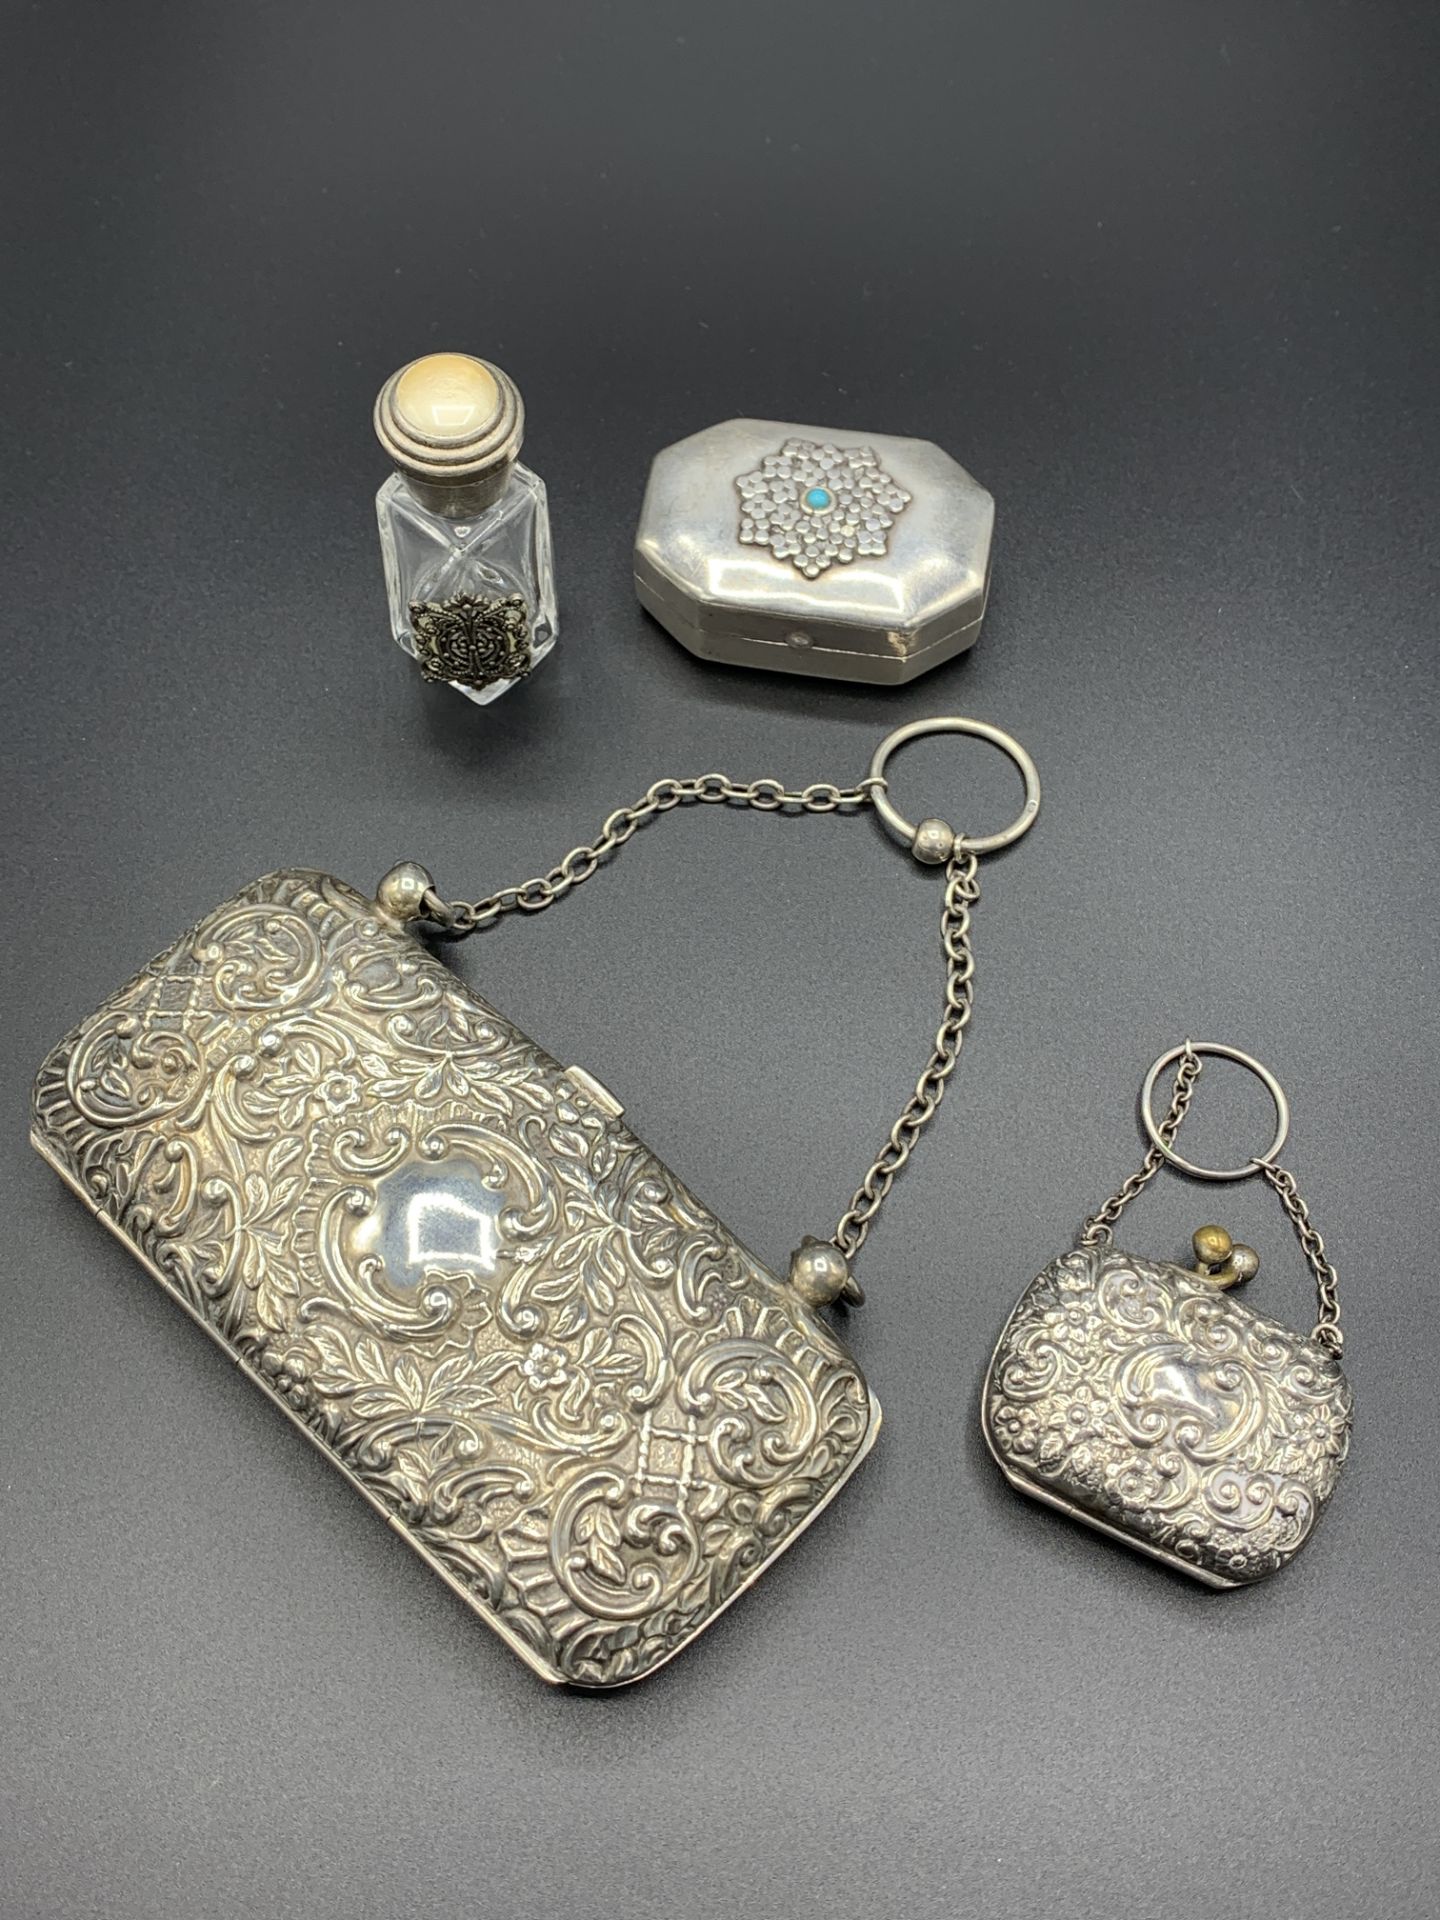 Two silver evening bags